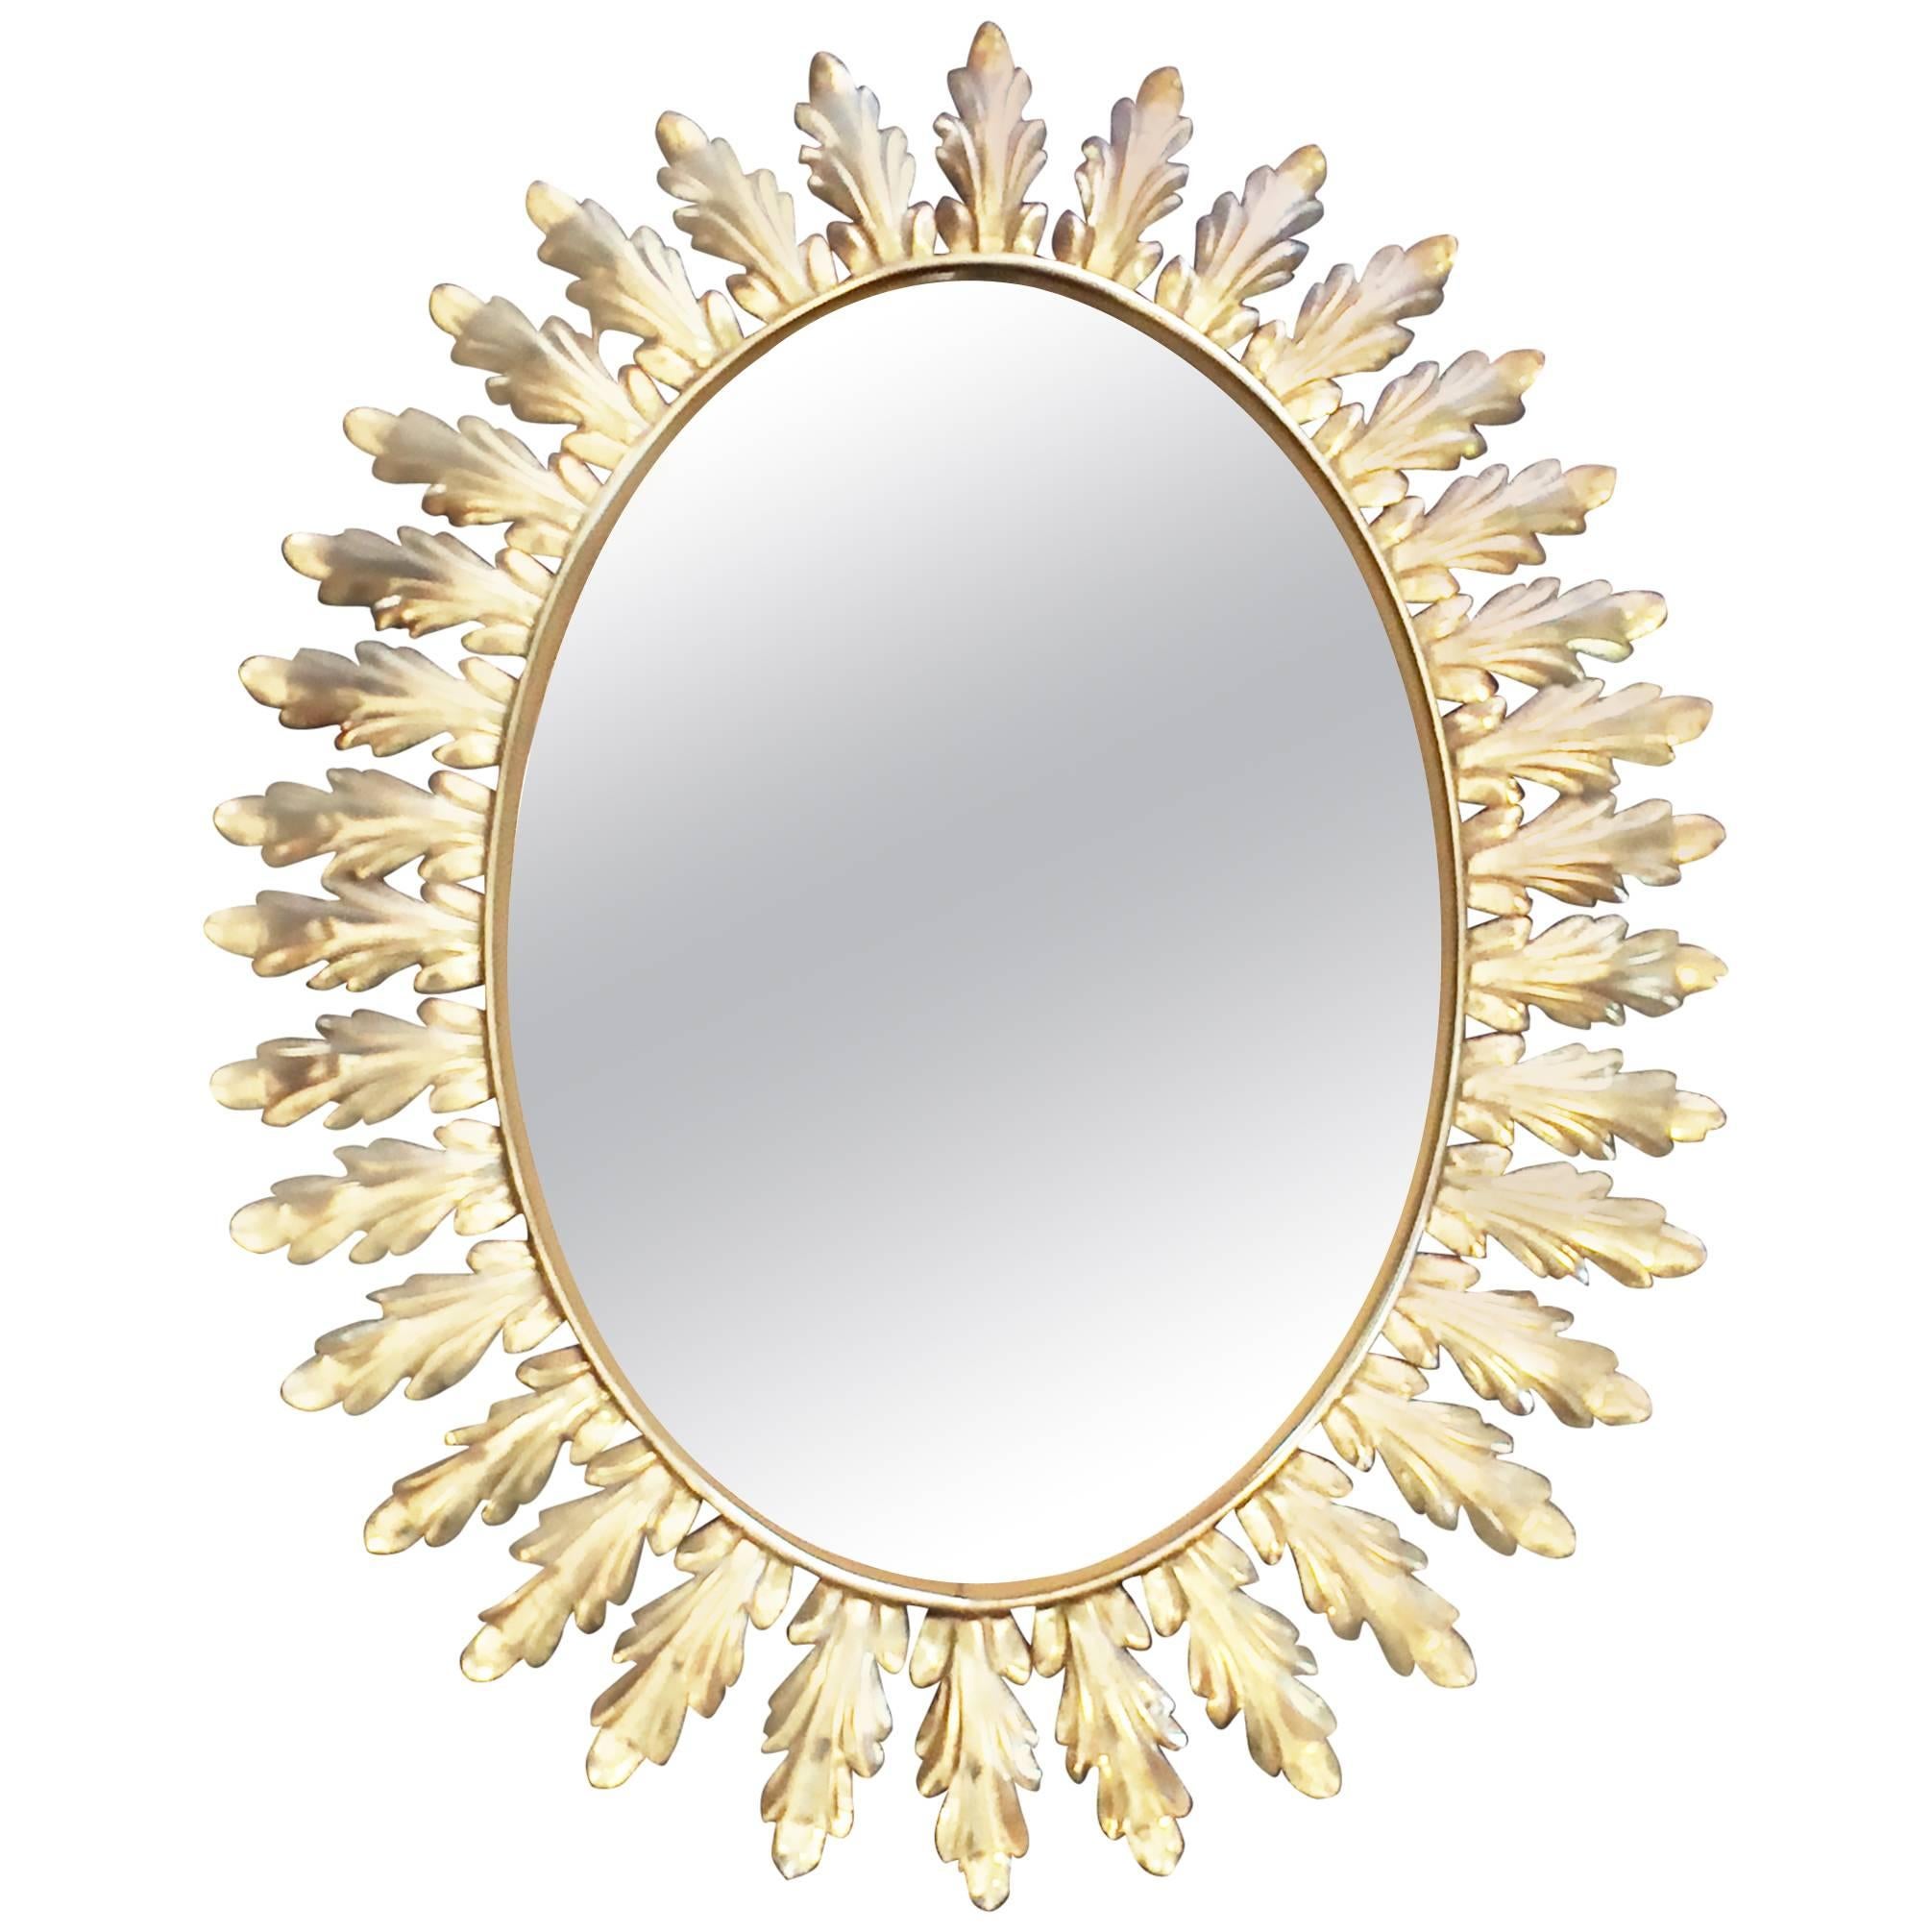 Large French Mid-Century Sunburst Style Mirror with Acanthus Leaves